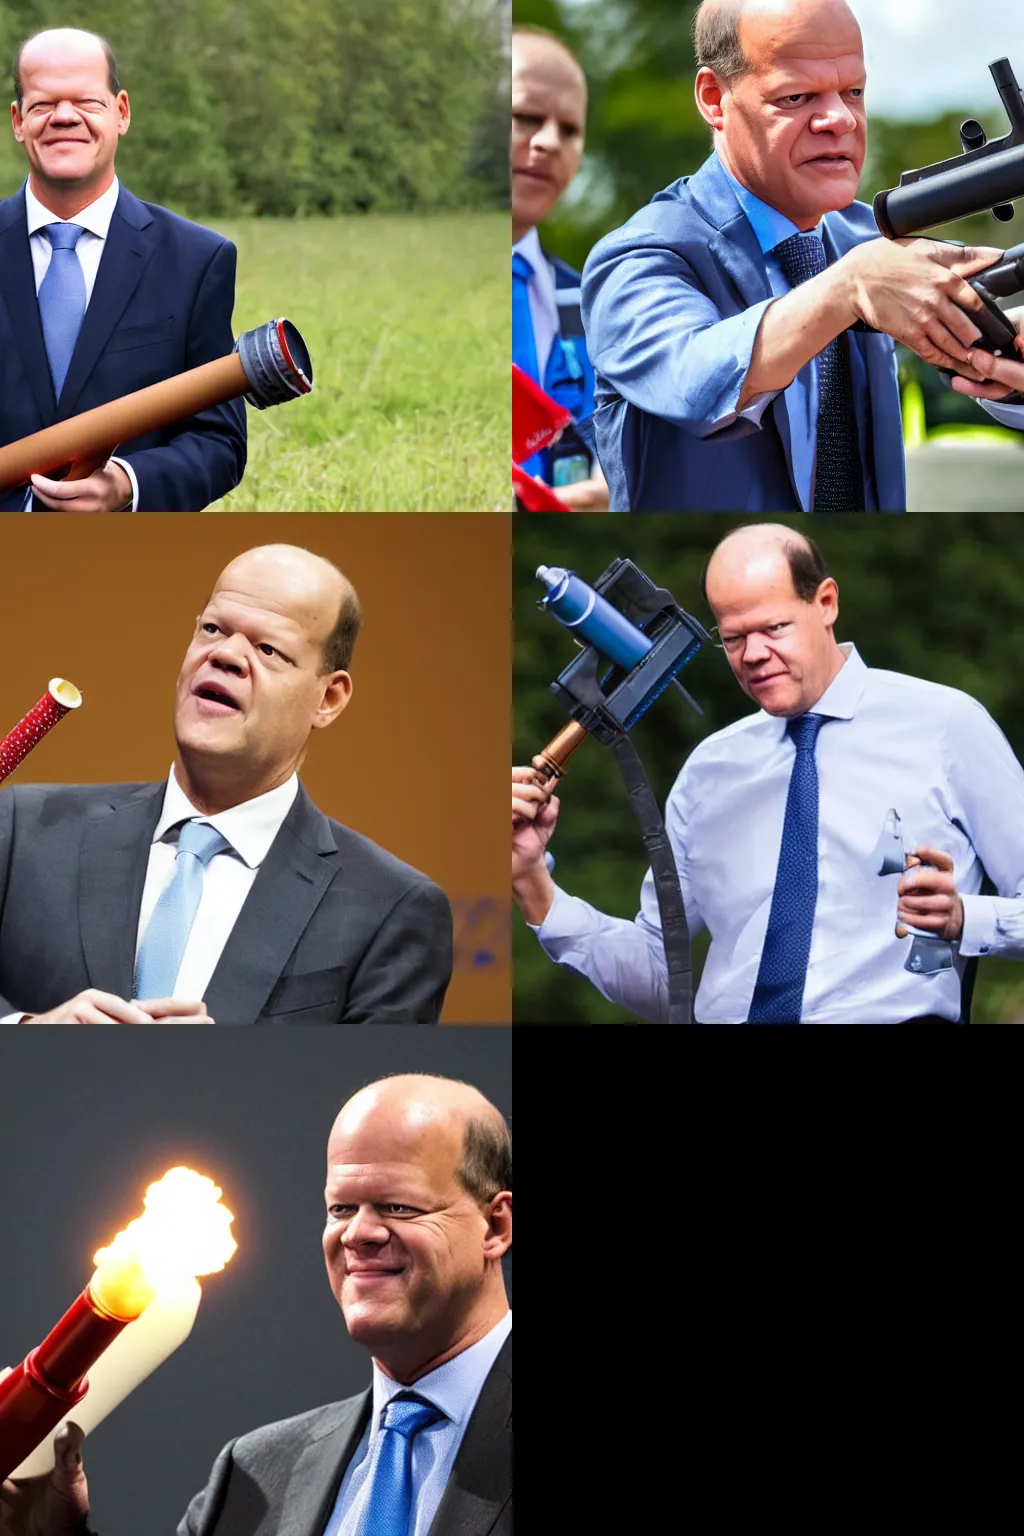 Prompt: Olaf Scholz holding a rocket launcher